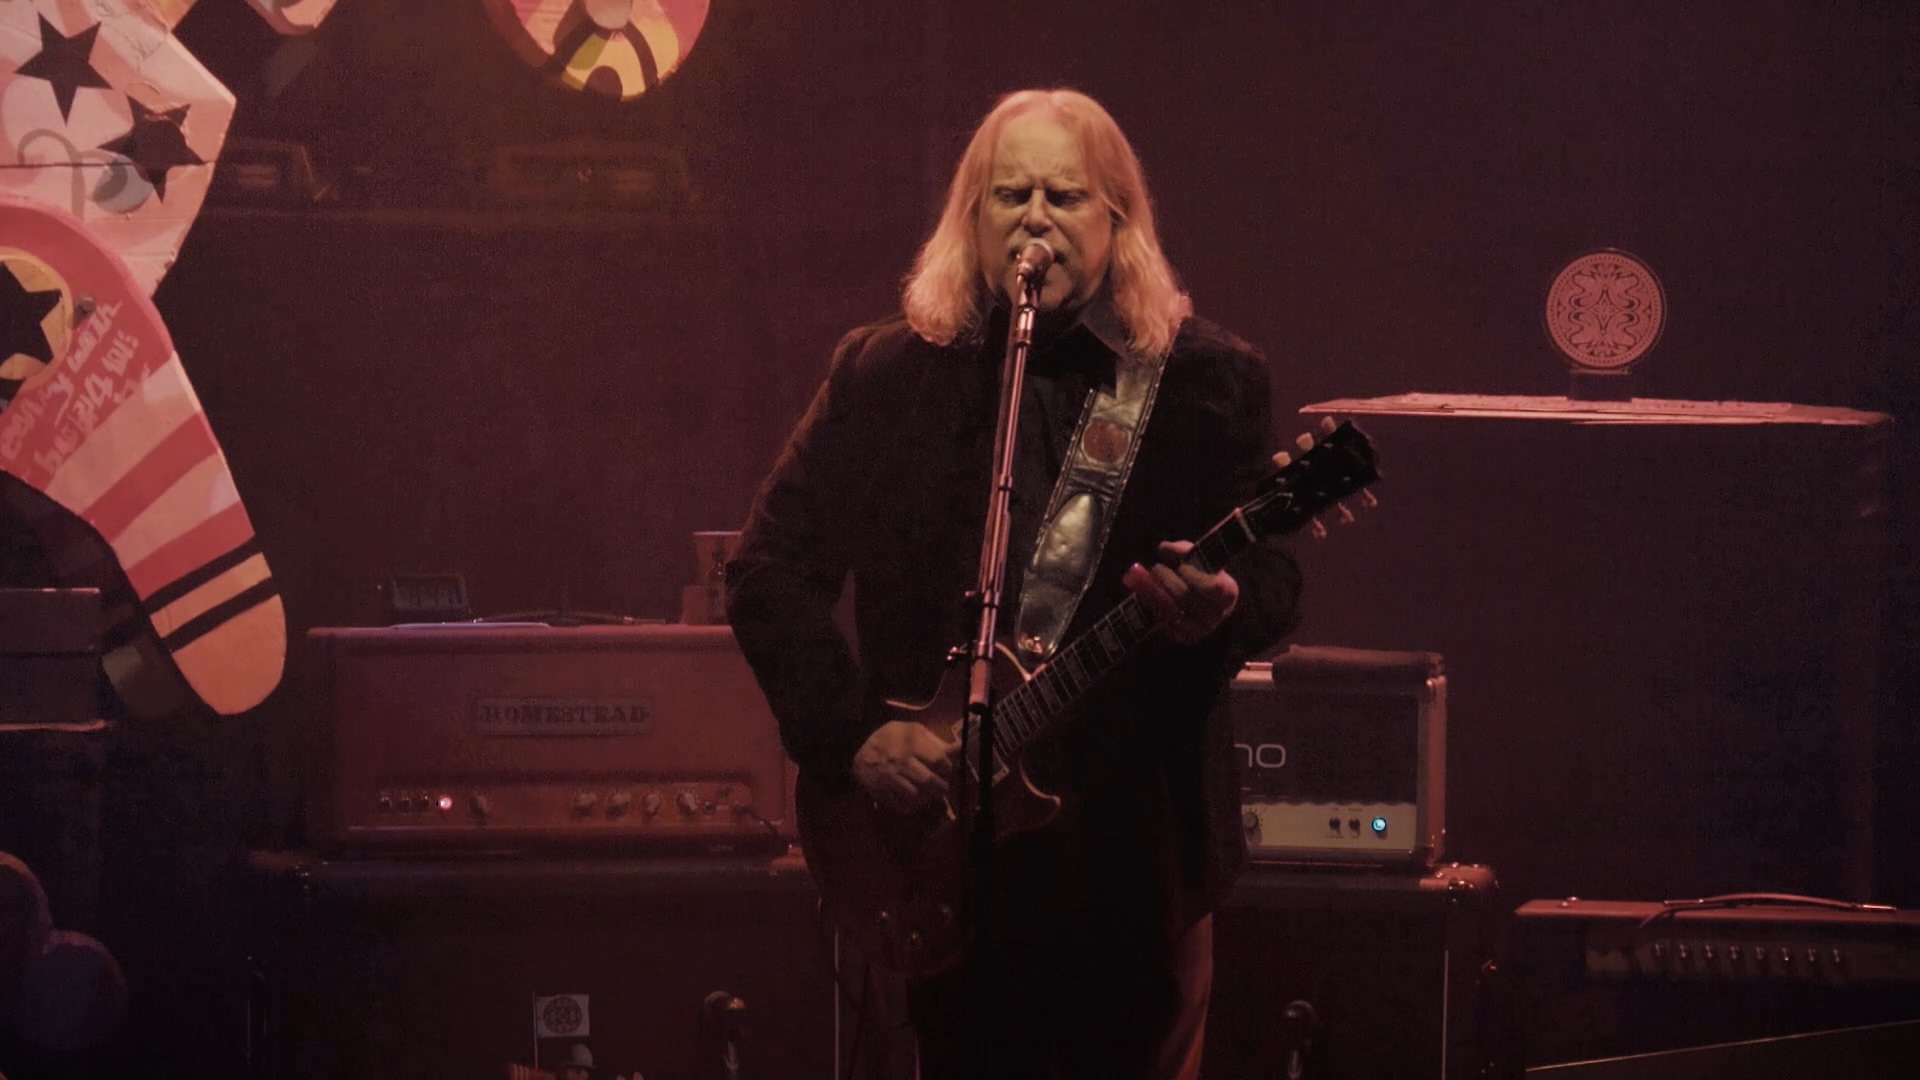 Gov't Mule - Bring On The Music Live At The Capitol Theatre 2018 Bluray 1080p AVC DTS-HD MA 5.1_20190727_125650.666.jpg